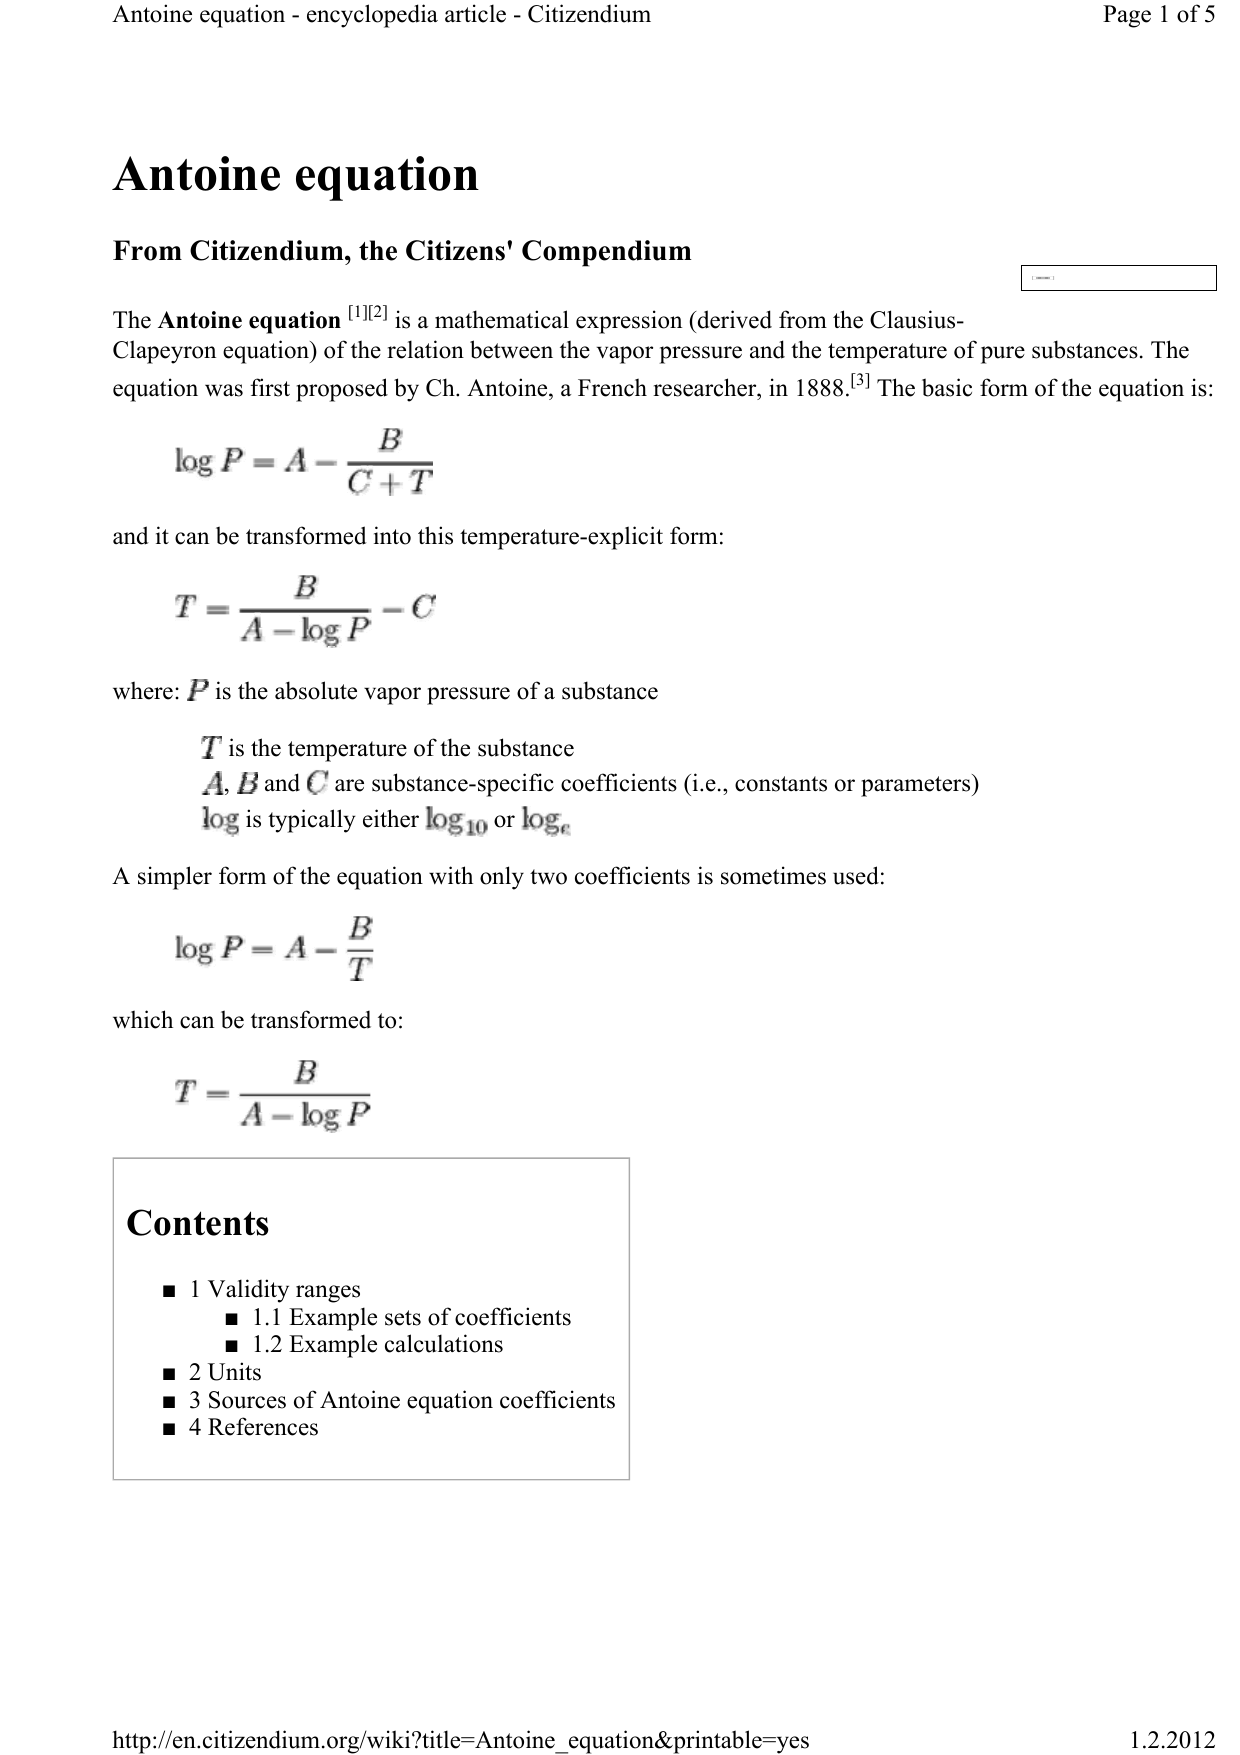 Solved 1. The NIST databases give the Antonie equation of